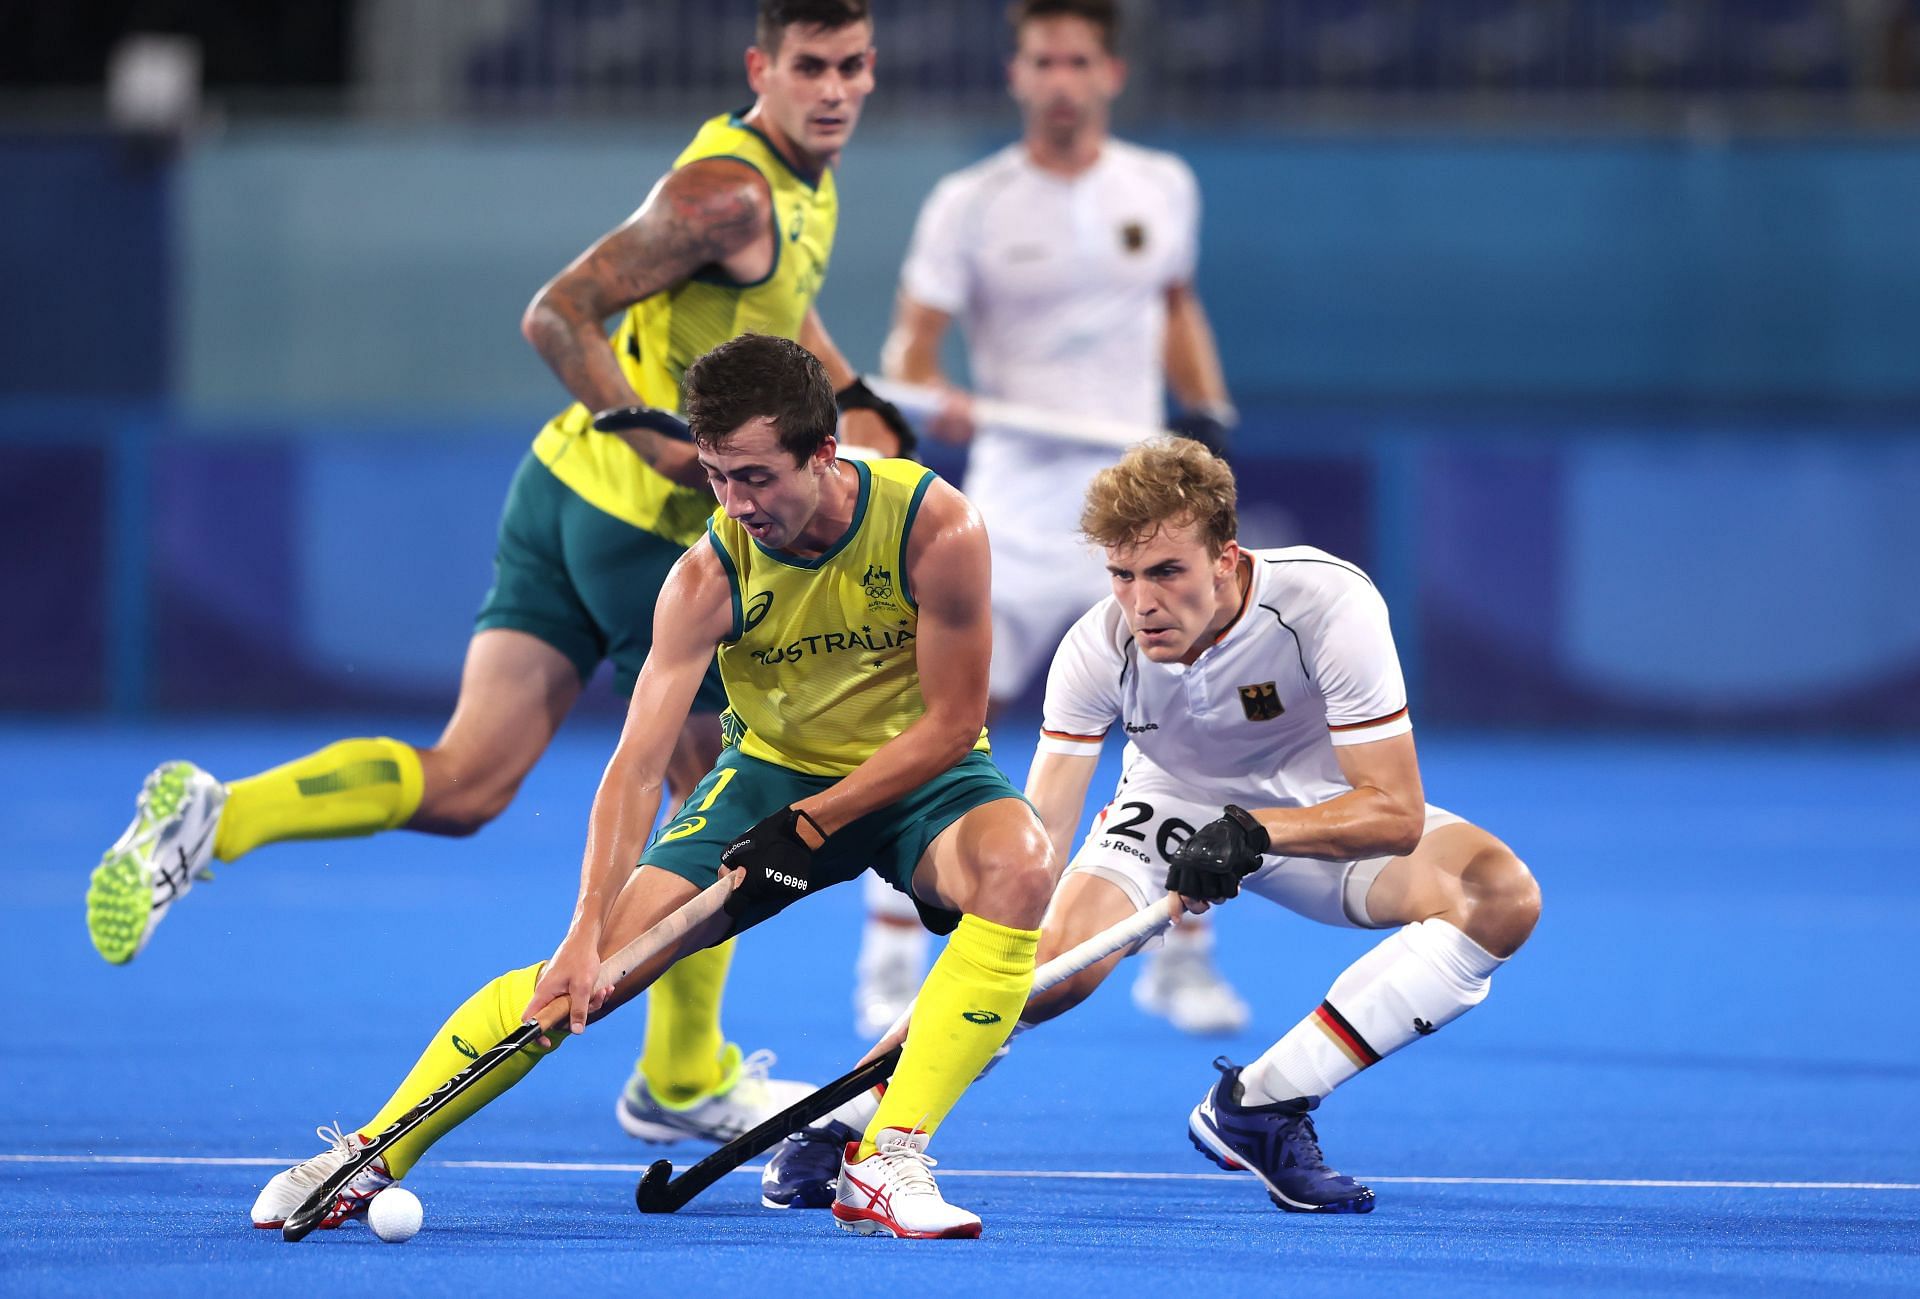 Australia beat Germany 3-1 in the semifinals of the Tokyo Olympics